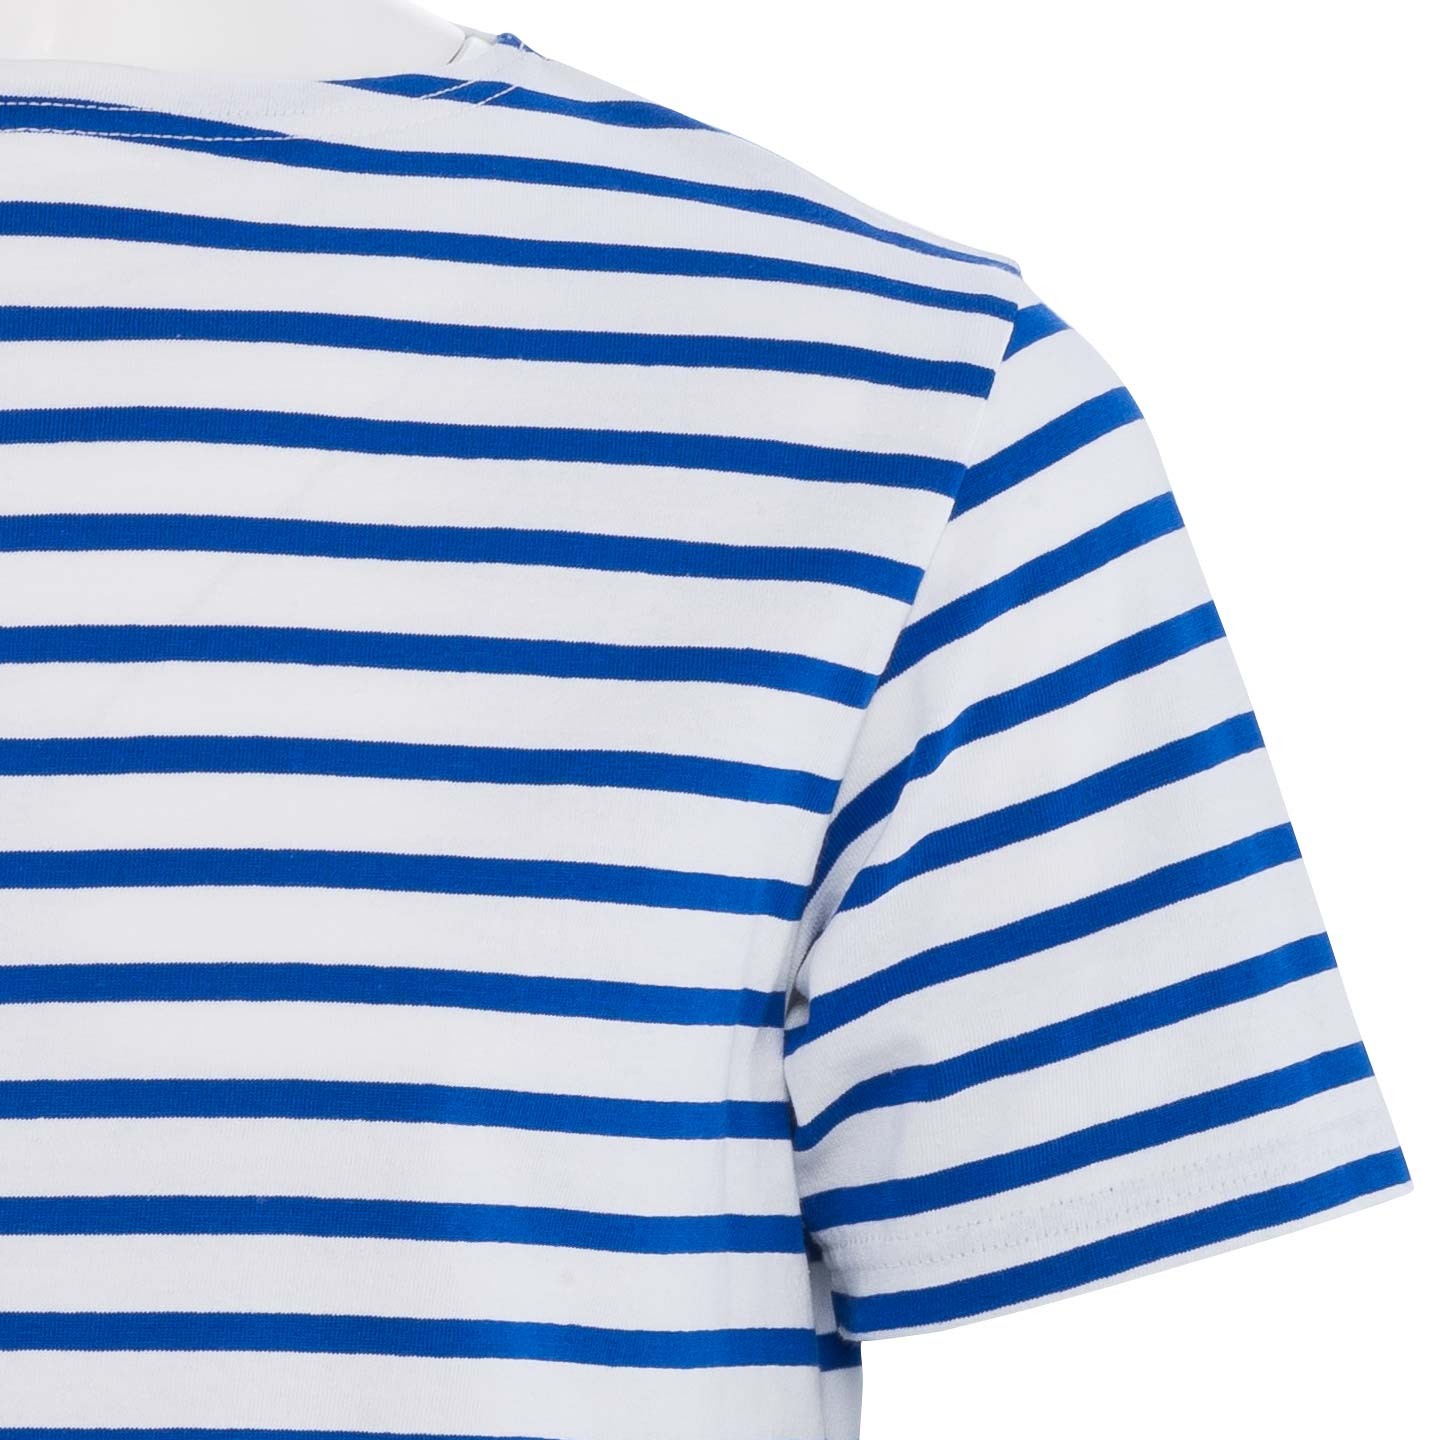 Short striped shirt White / Blue, unisex made in France Orcival